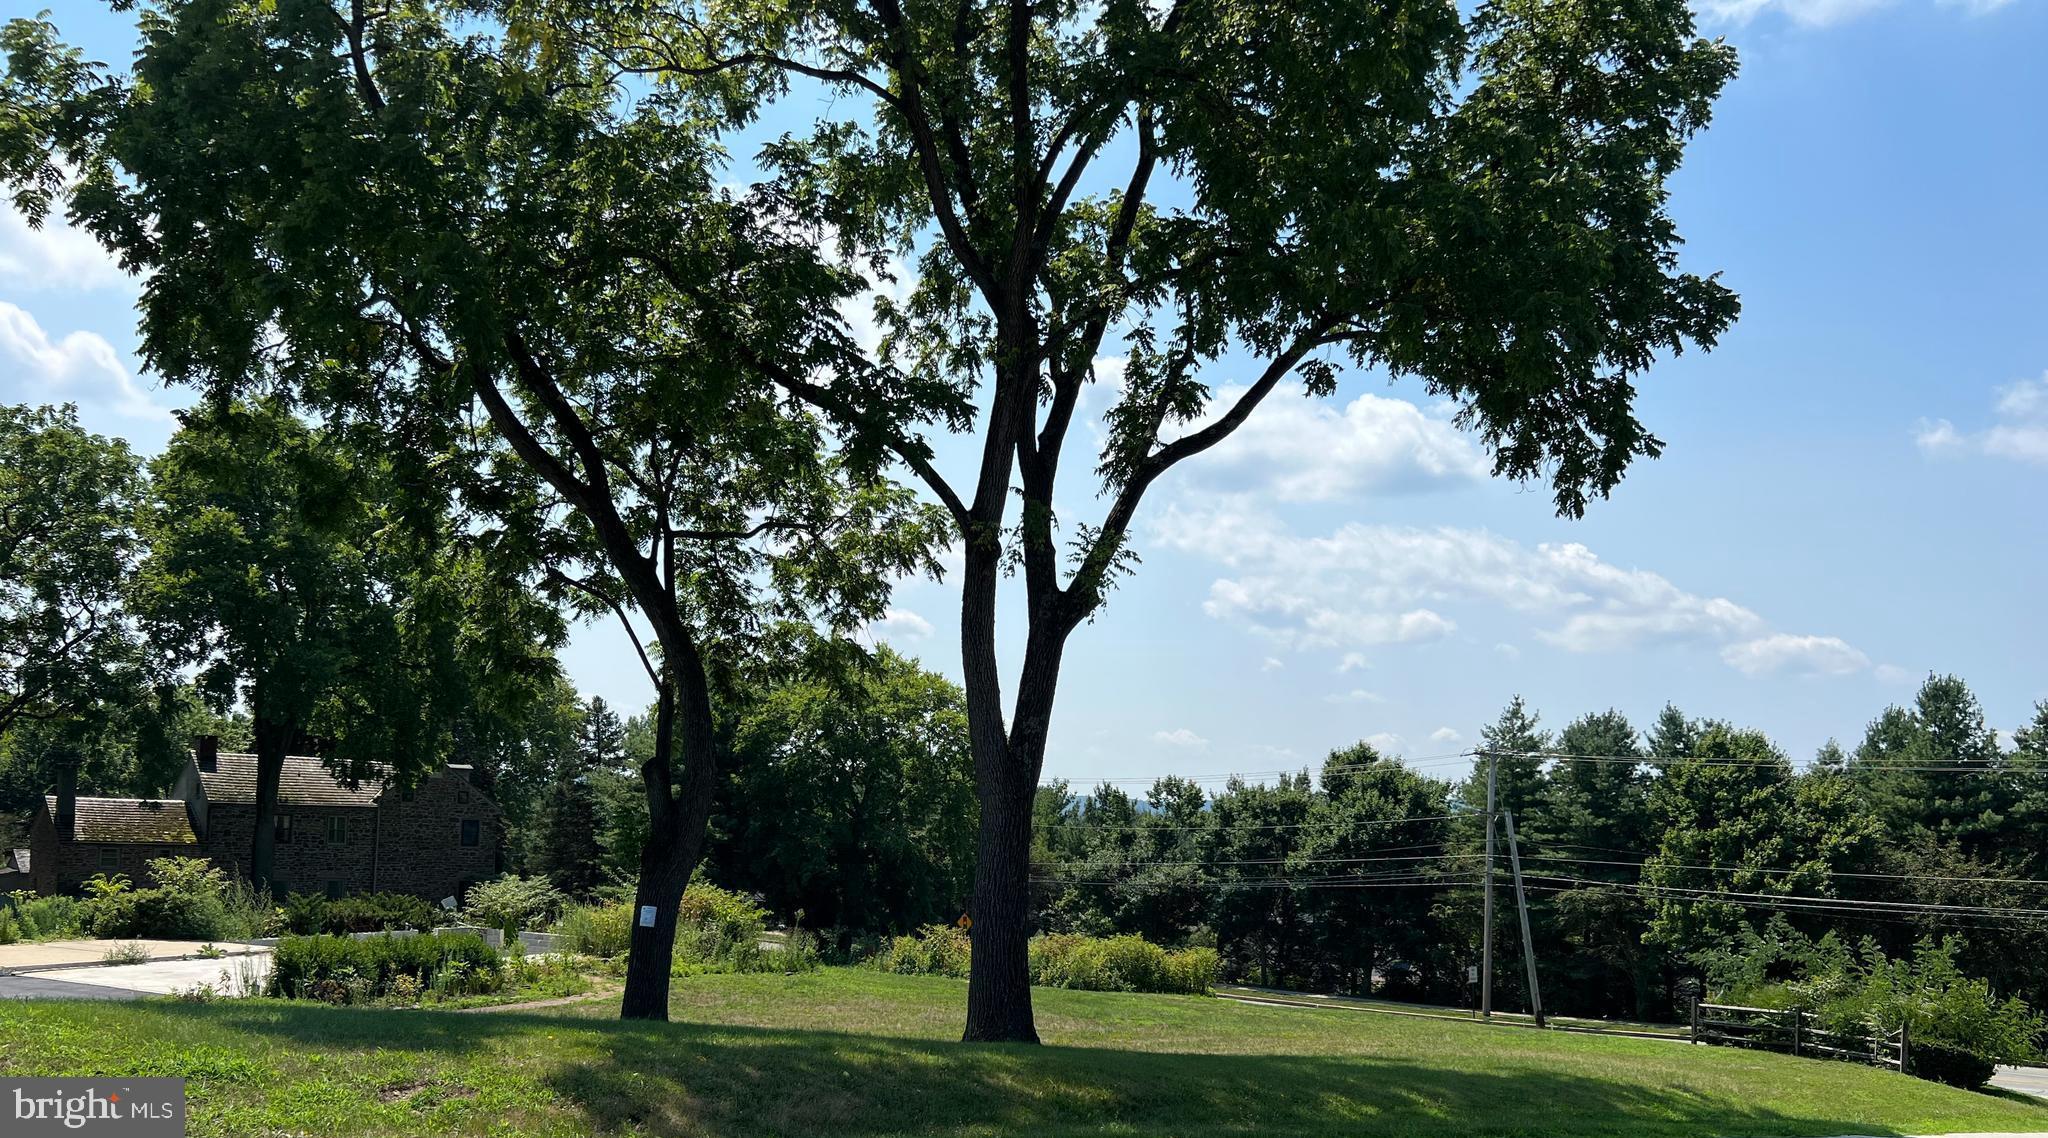 a view of a park with large trees